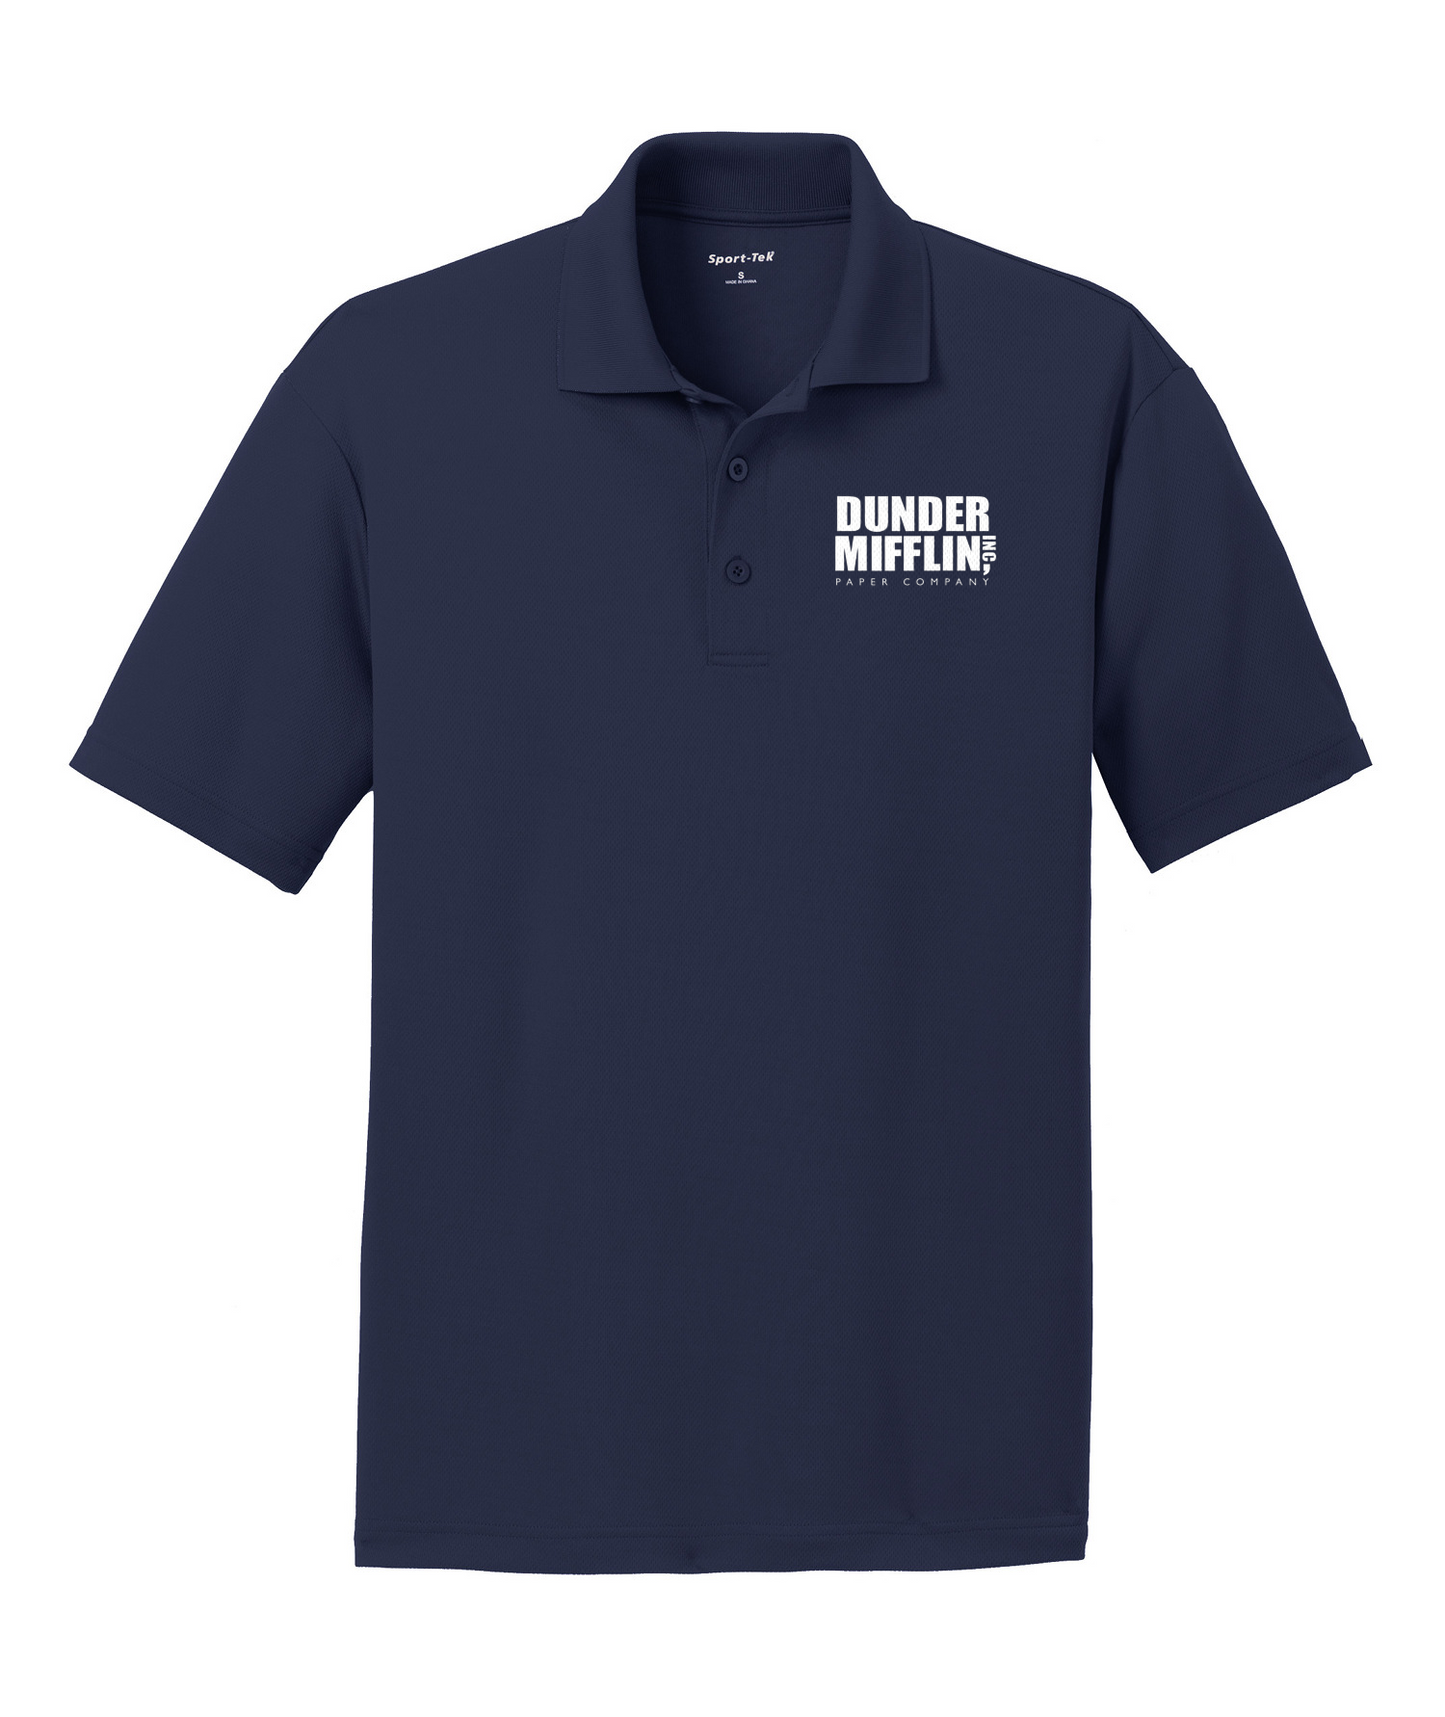 The Office Dunder Mifflin Men's Embroidered Polo